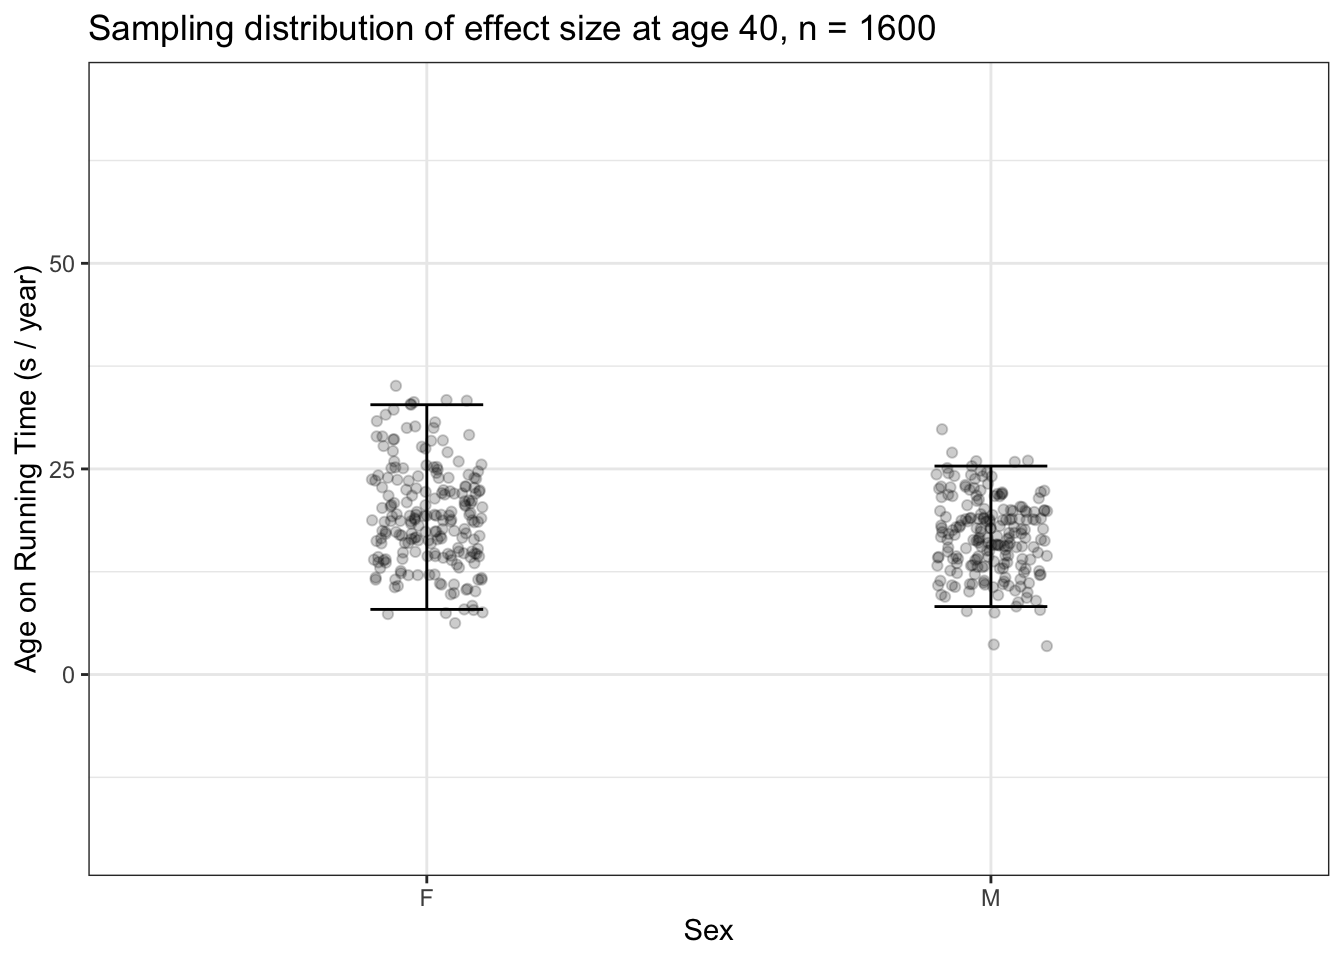 200 sampling trials for the effect size of age on running time, each trial with a sample of size n = 1600. The intervals shown here are roughly half as long as those seen in Figure 15.4, where n was 400.